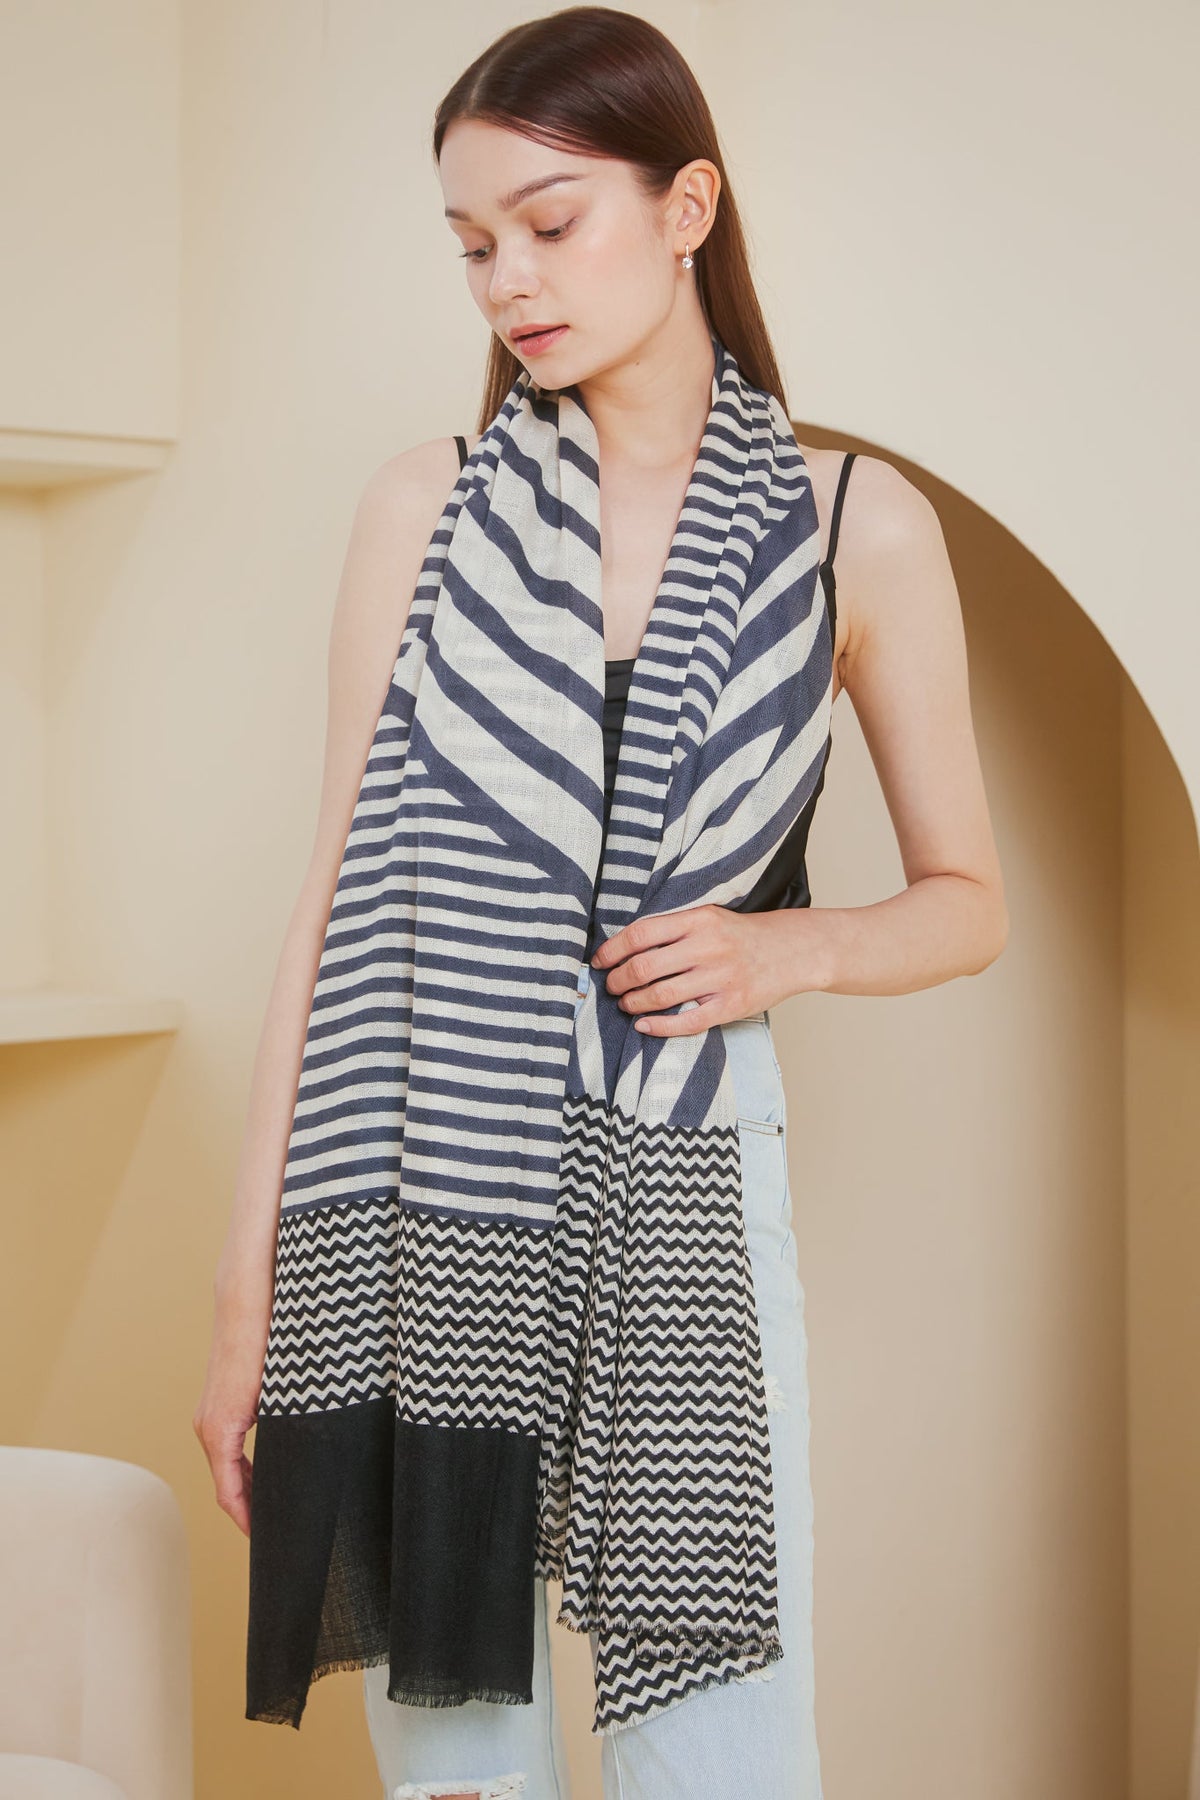 Backorder* Luxe Cashmere Shawl in Striped Navy